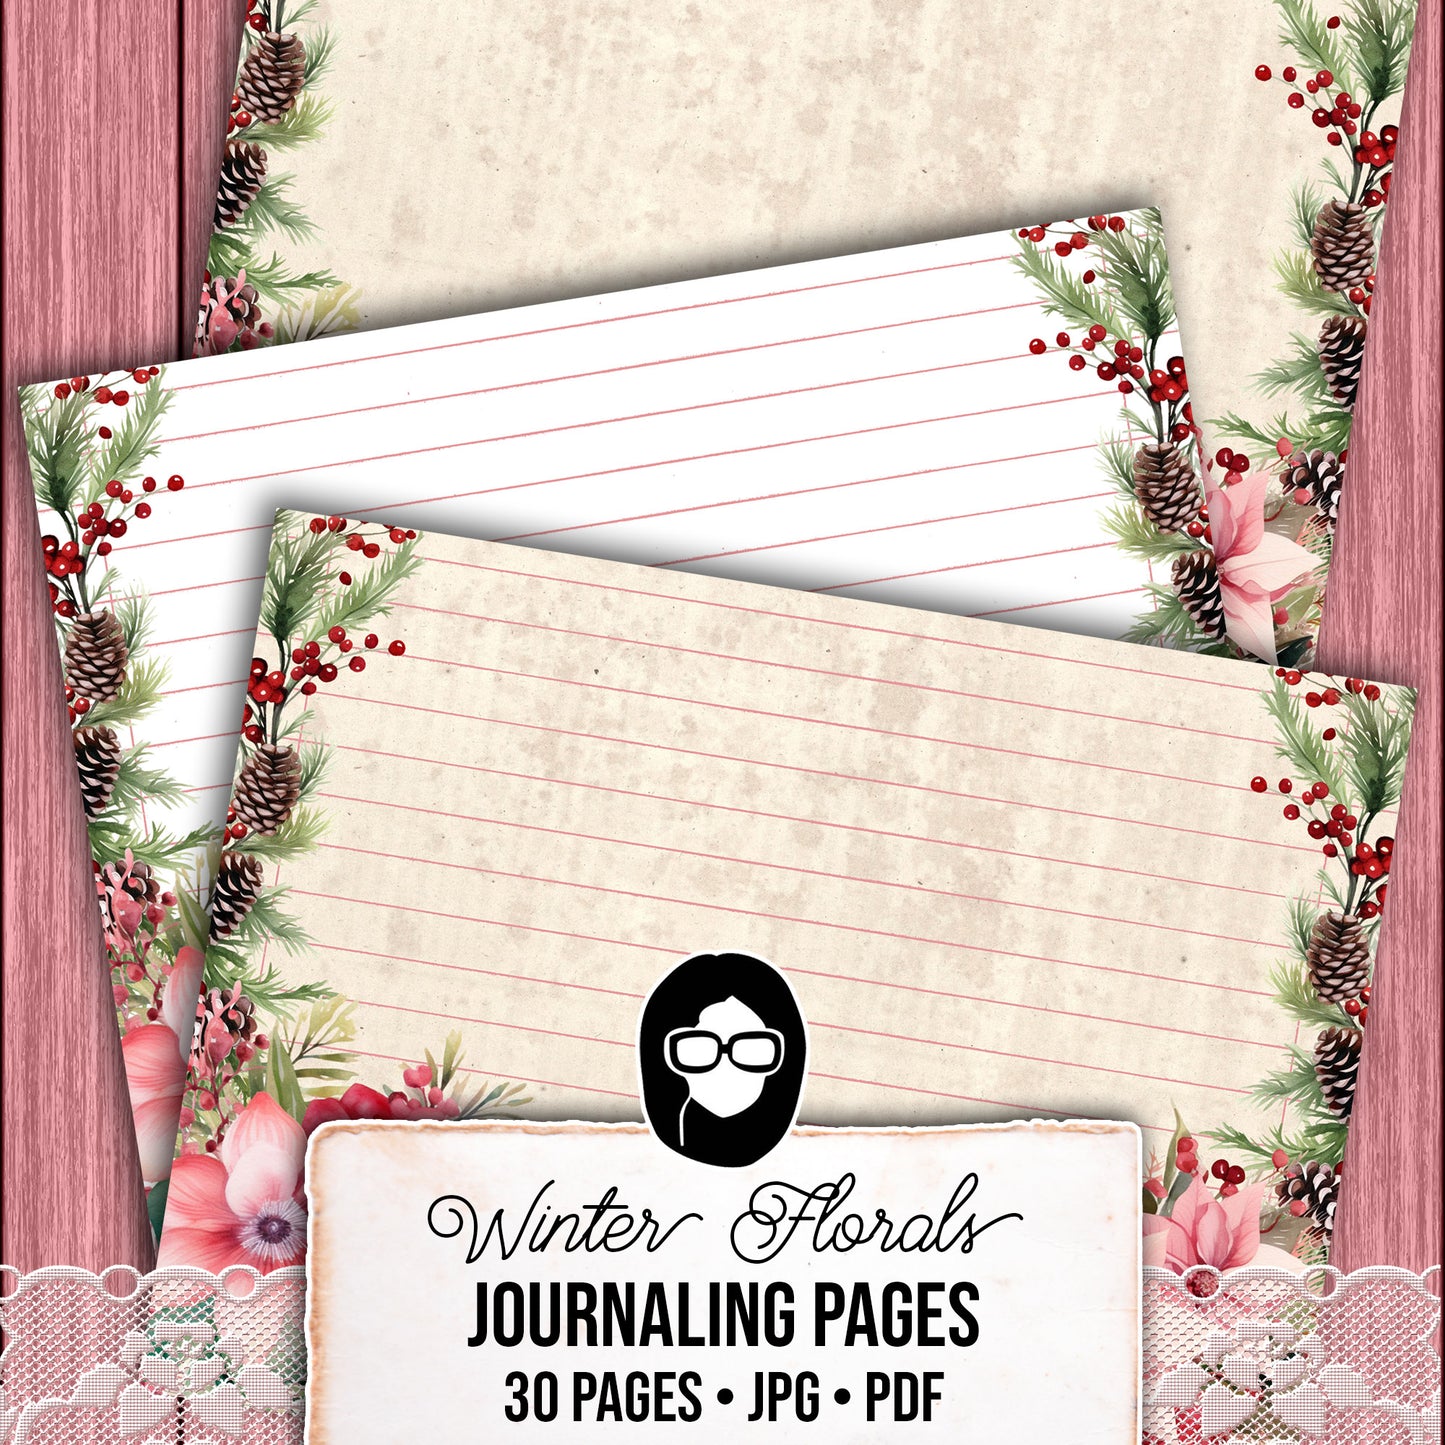 Christmas Journal Pages, Lined Journaling Papers -30pg Digital Download- Holiday Printable Paper, Christmas Flowers, Pink Holly Berries